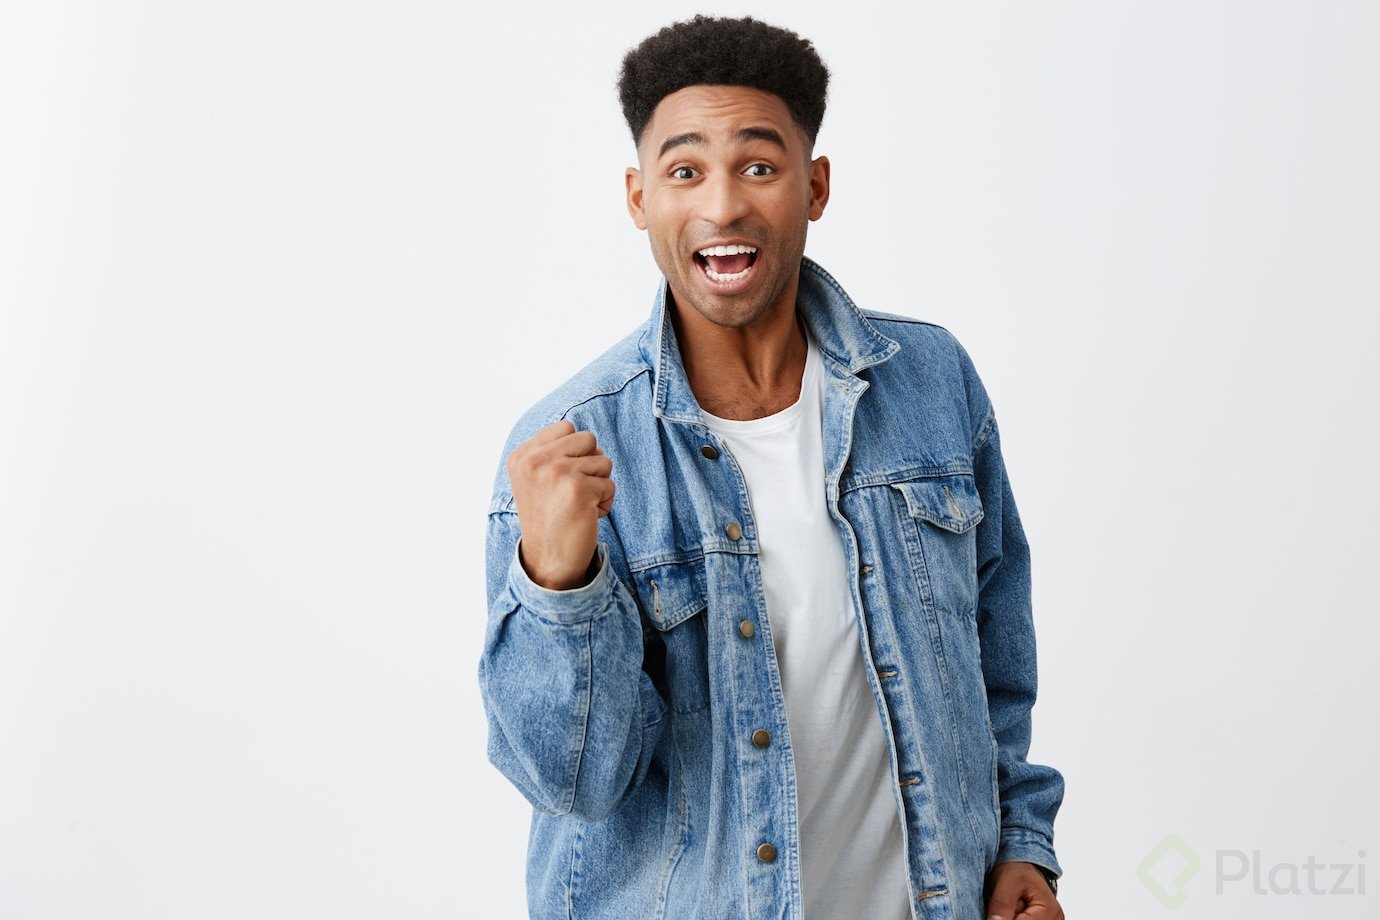 yeah-finally-we-did-it-cheerful-young-attractive-black-skinned-man-with-afro-hairstyle-denim-jacket-holding-hand-front-him-with-excited-expression-being-happy-he-won-lottery_176420-13040.jpg